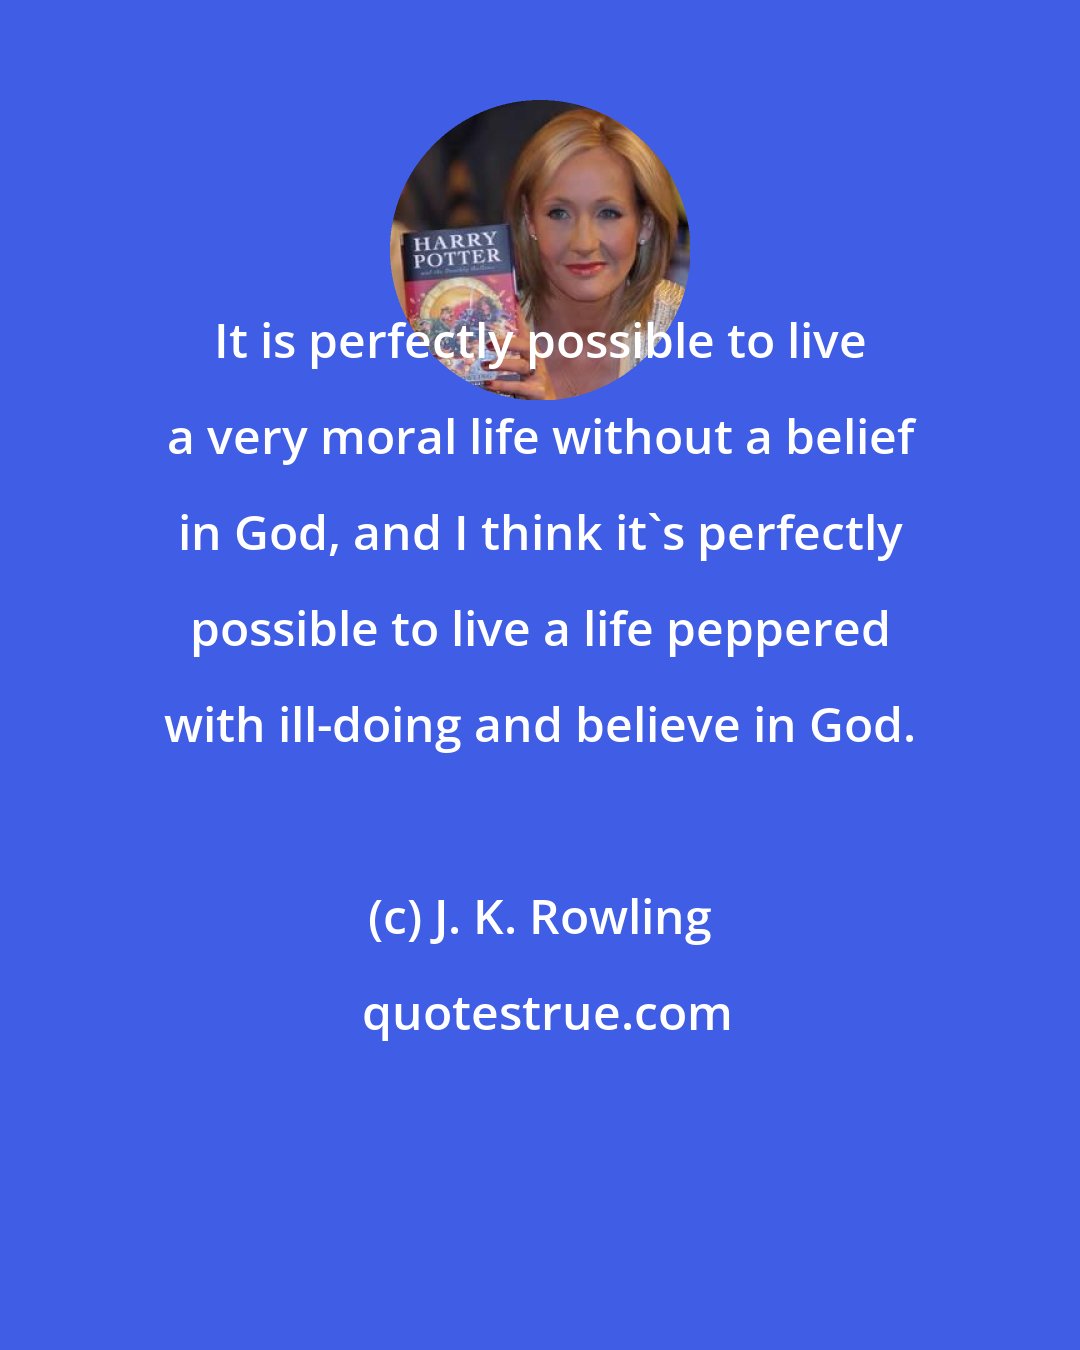 J. K. Rowling: It is perfectly possible to live a very moral life without a belief in God, and I think it's perfectly possible to live a life peppered with ill-doing and believe in God.